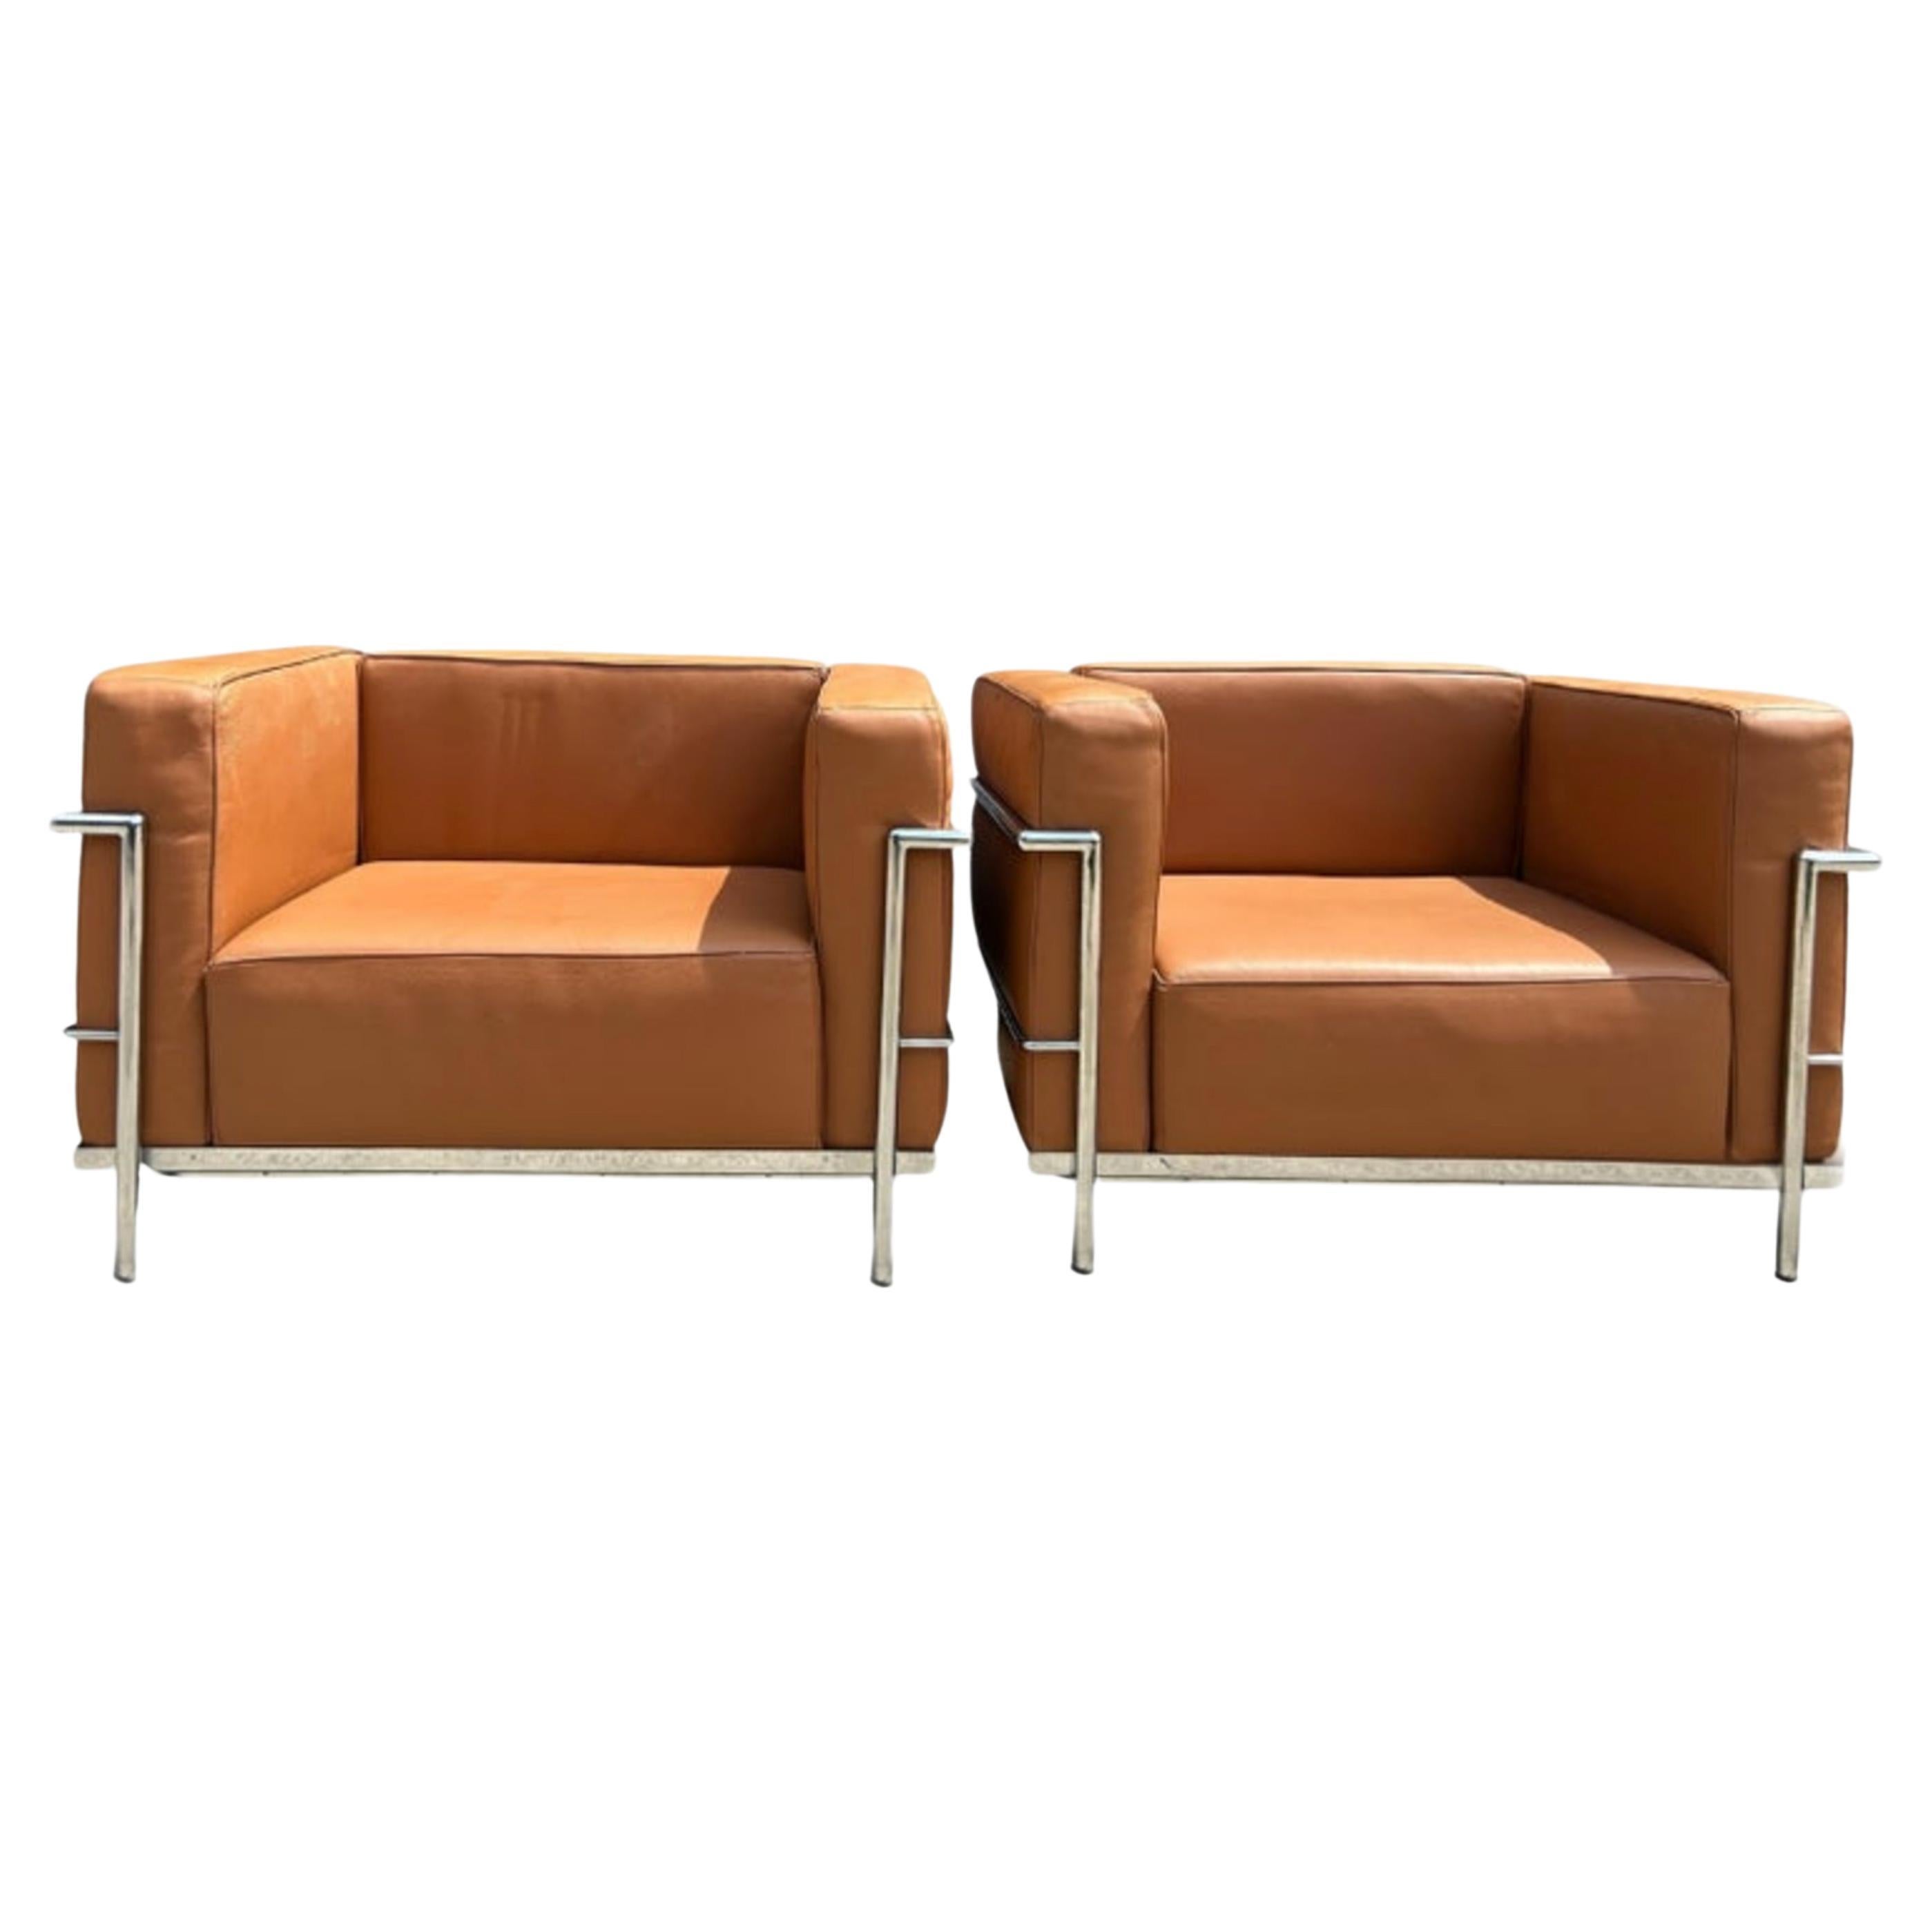 Pair of Vintage LC3 leather chrome frame lounge chairs by Le Corbusier